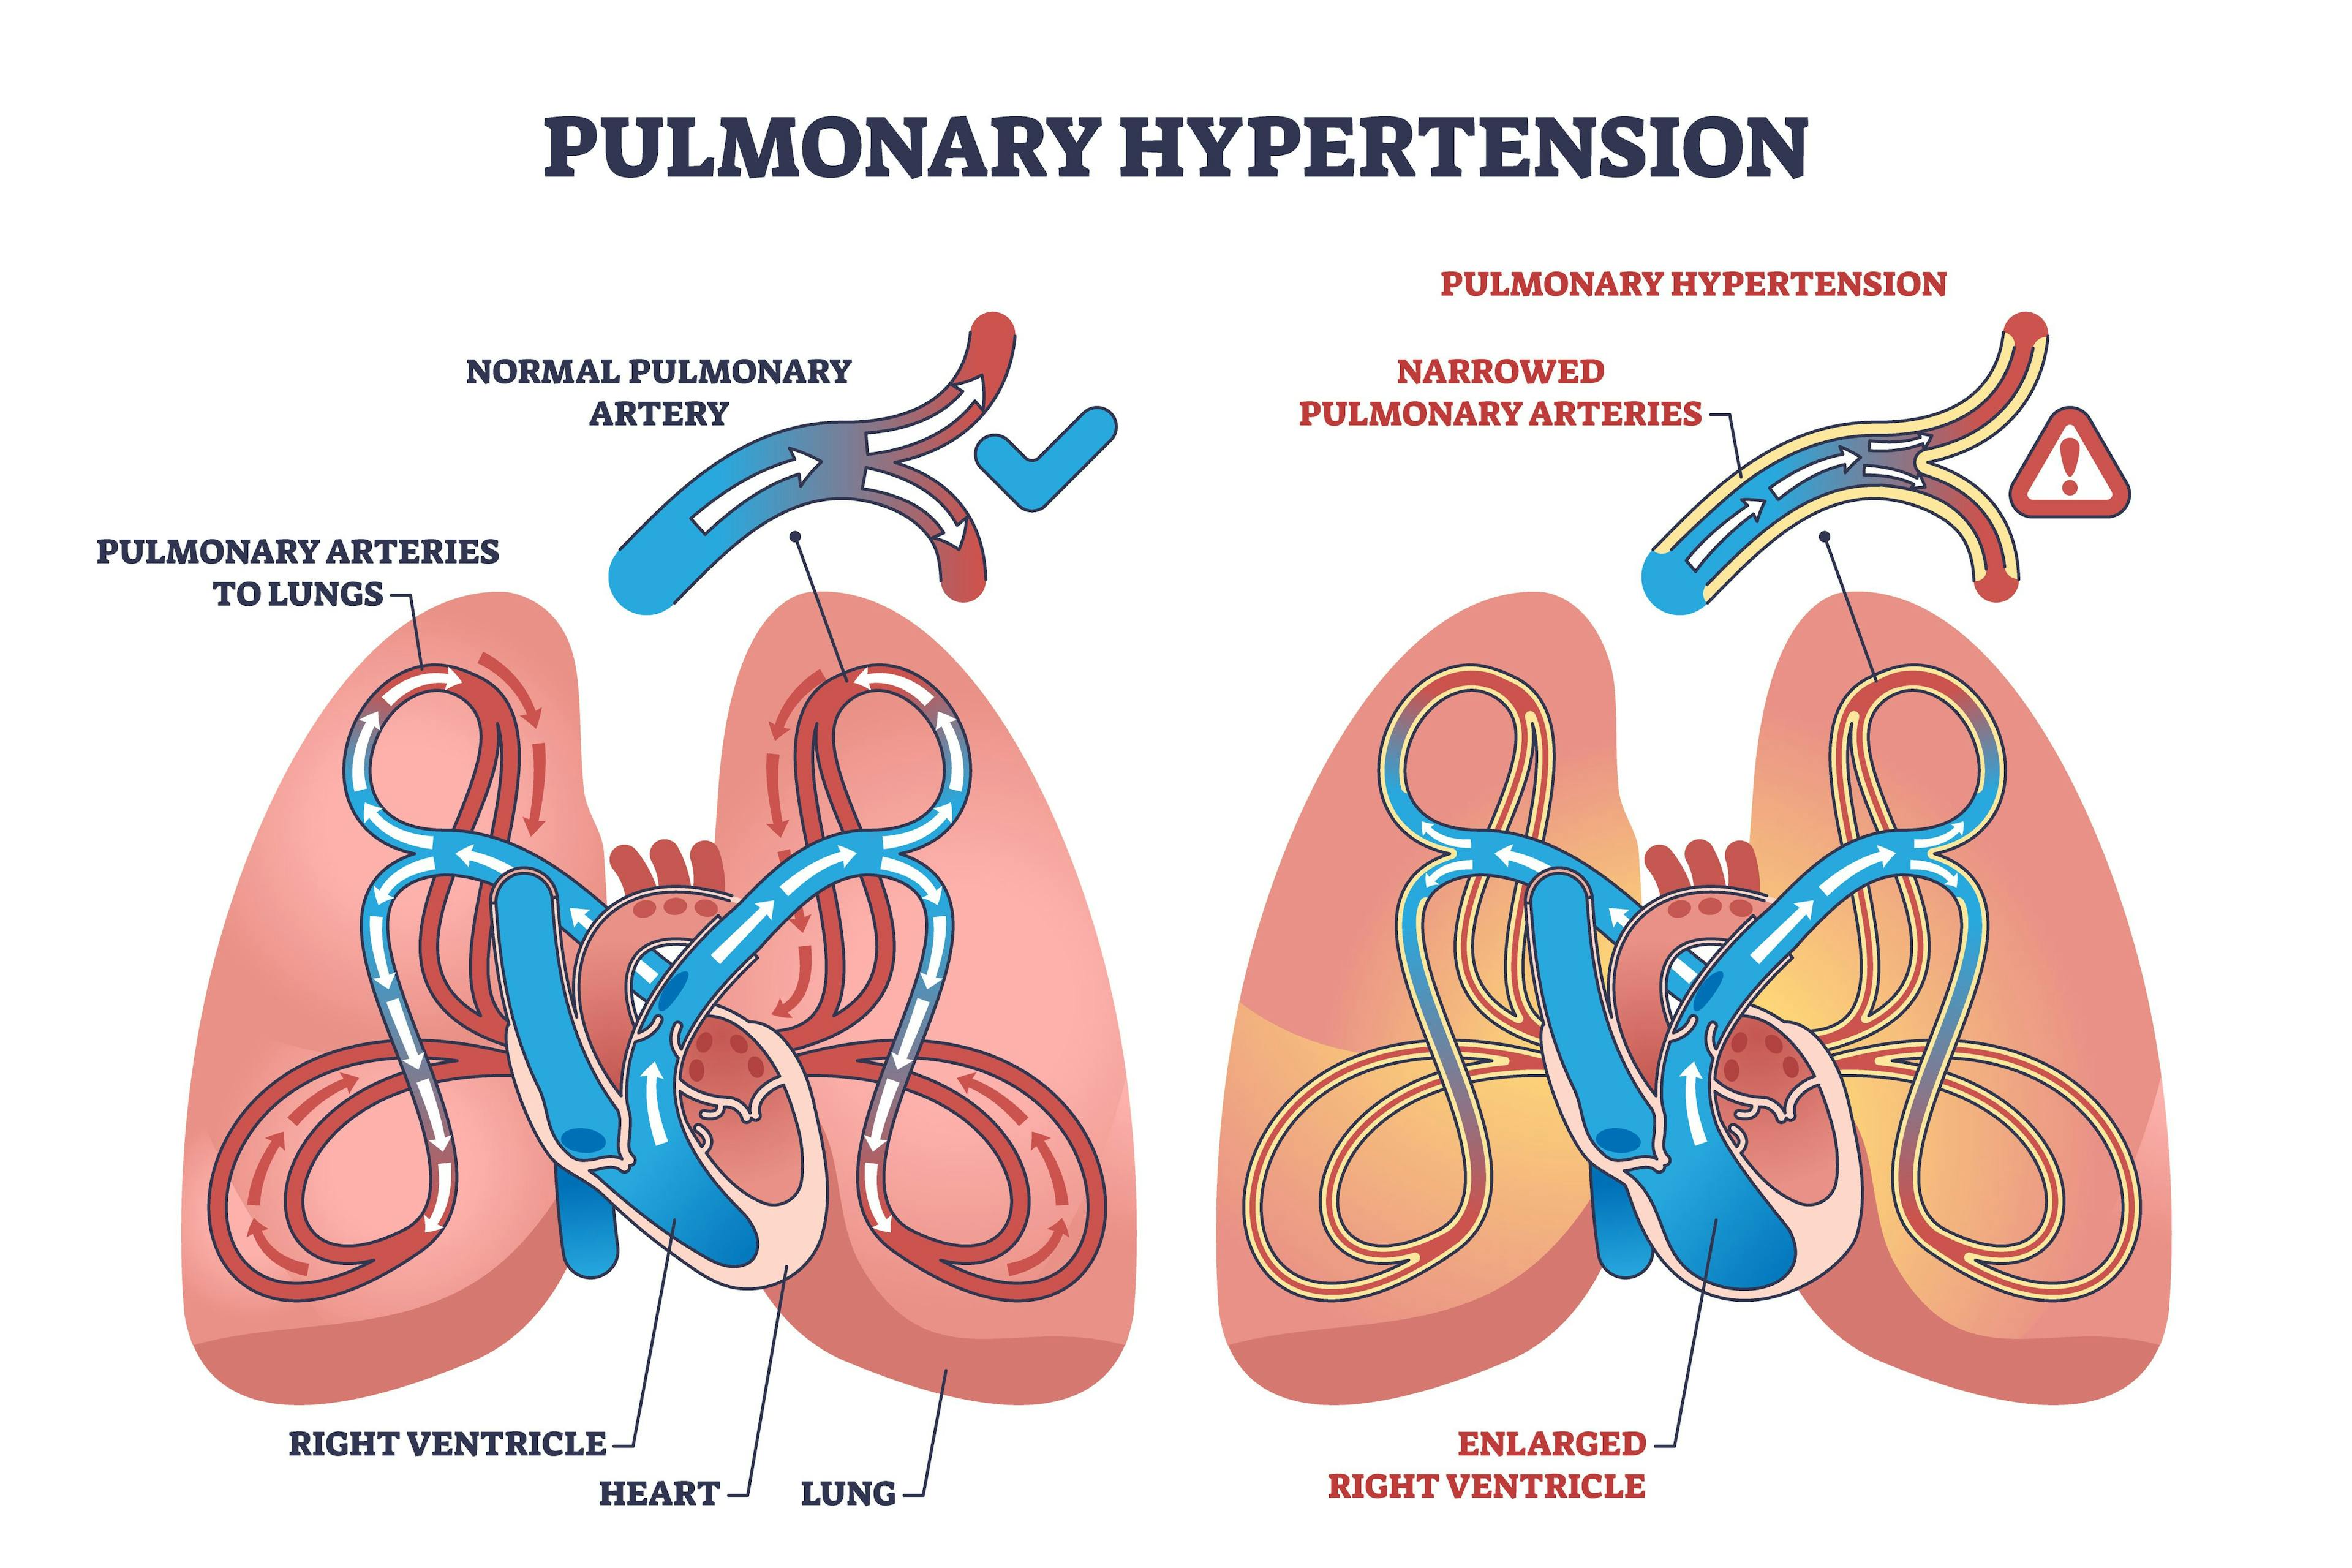 Pulmonary hypertension with narrow arteries and blockage | Image credit: VectorMine - stock.adobe.com